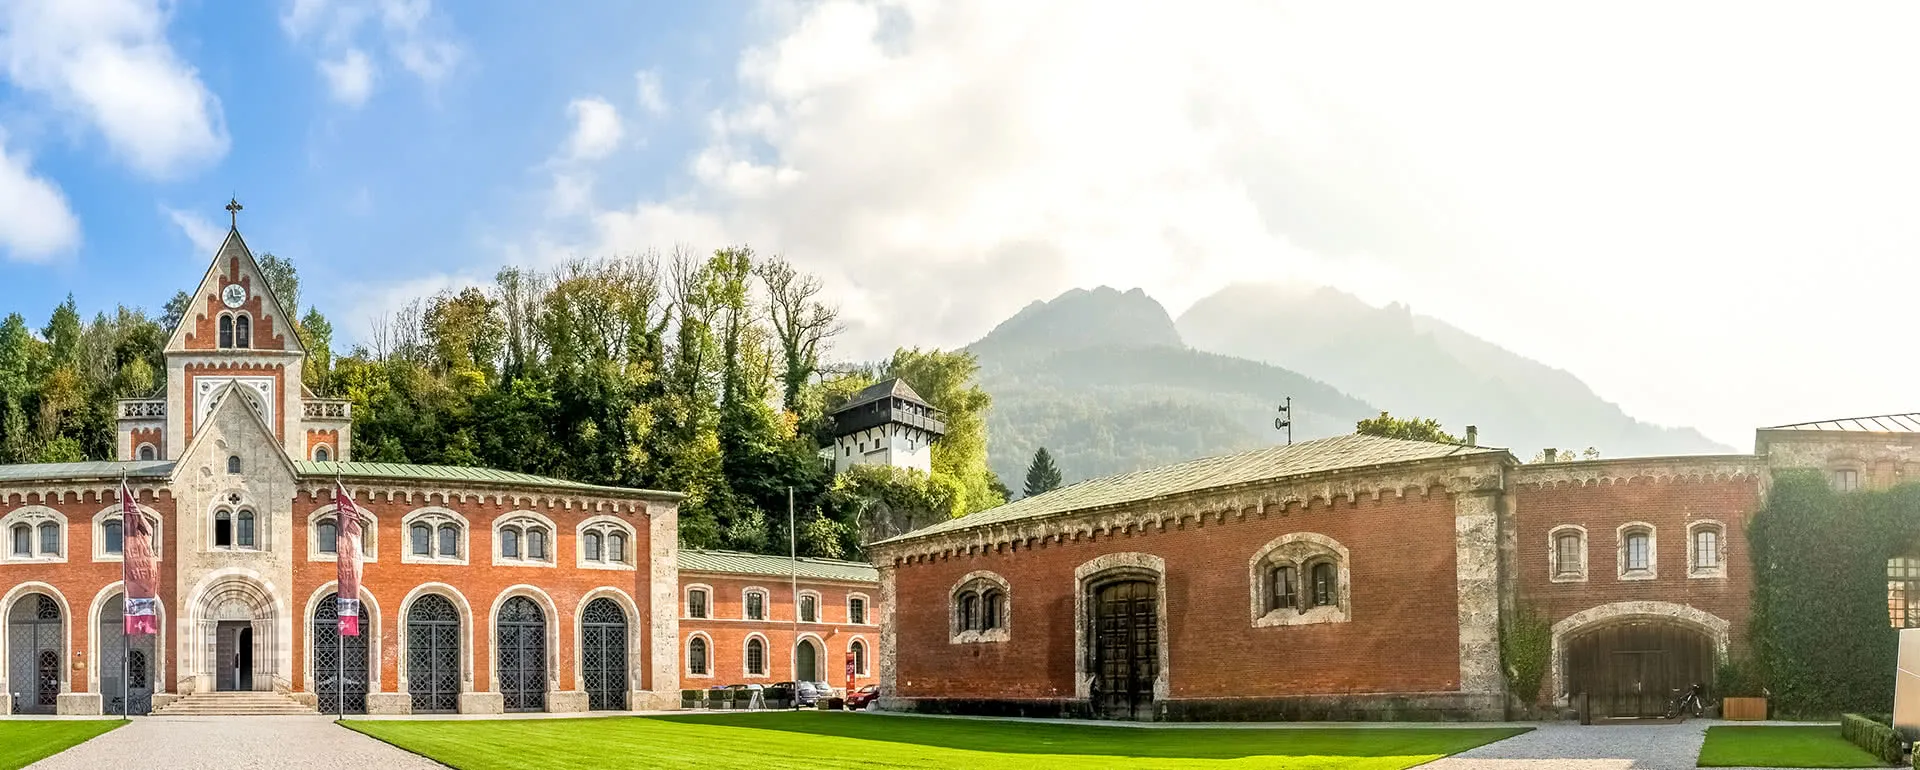 Meeting and conference location Bad Reichenhall